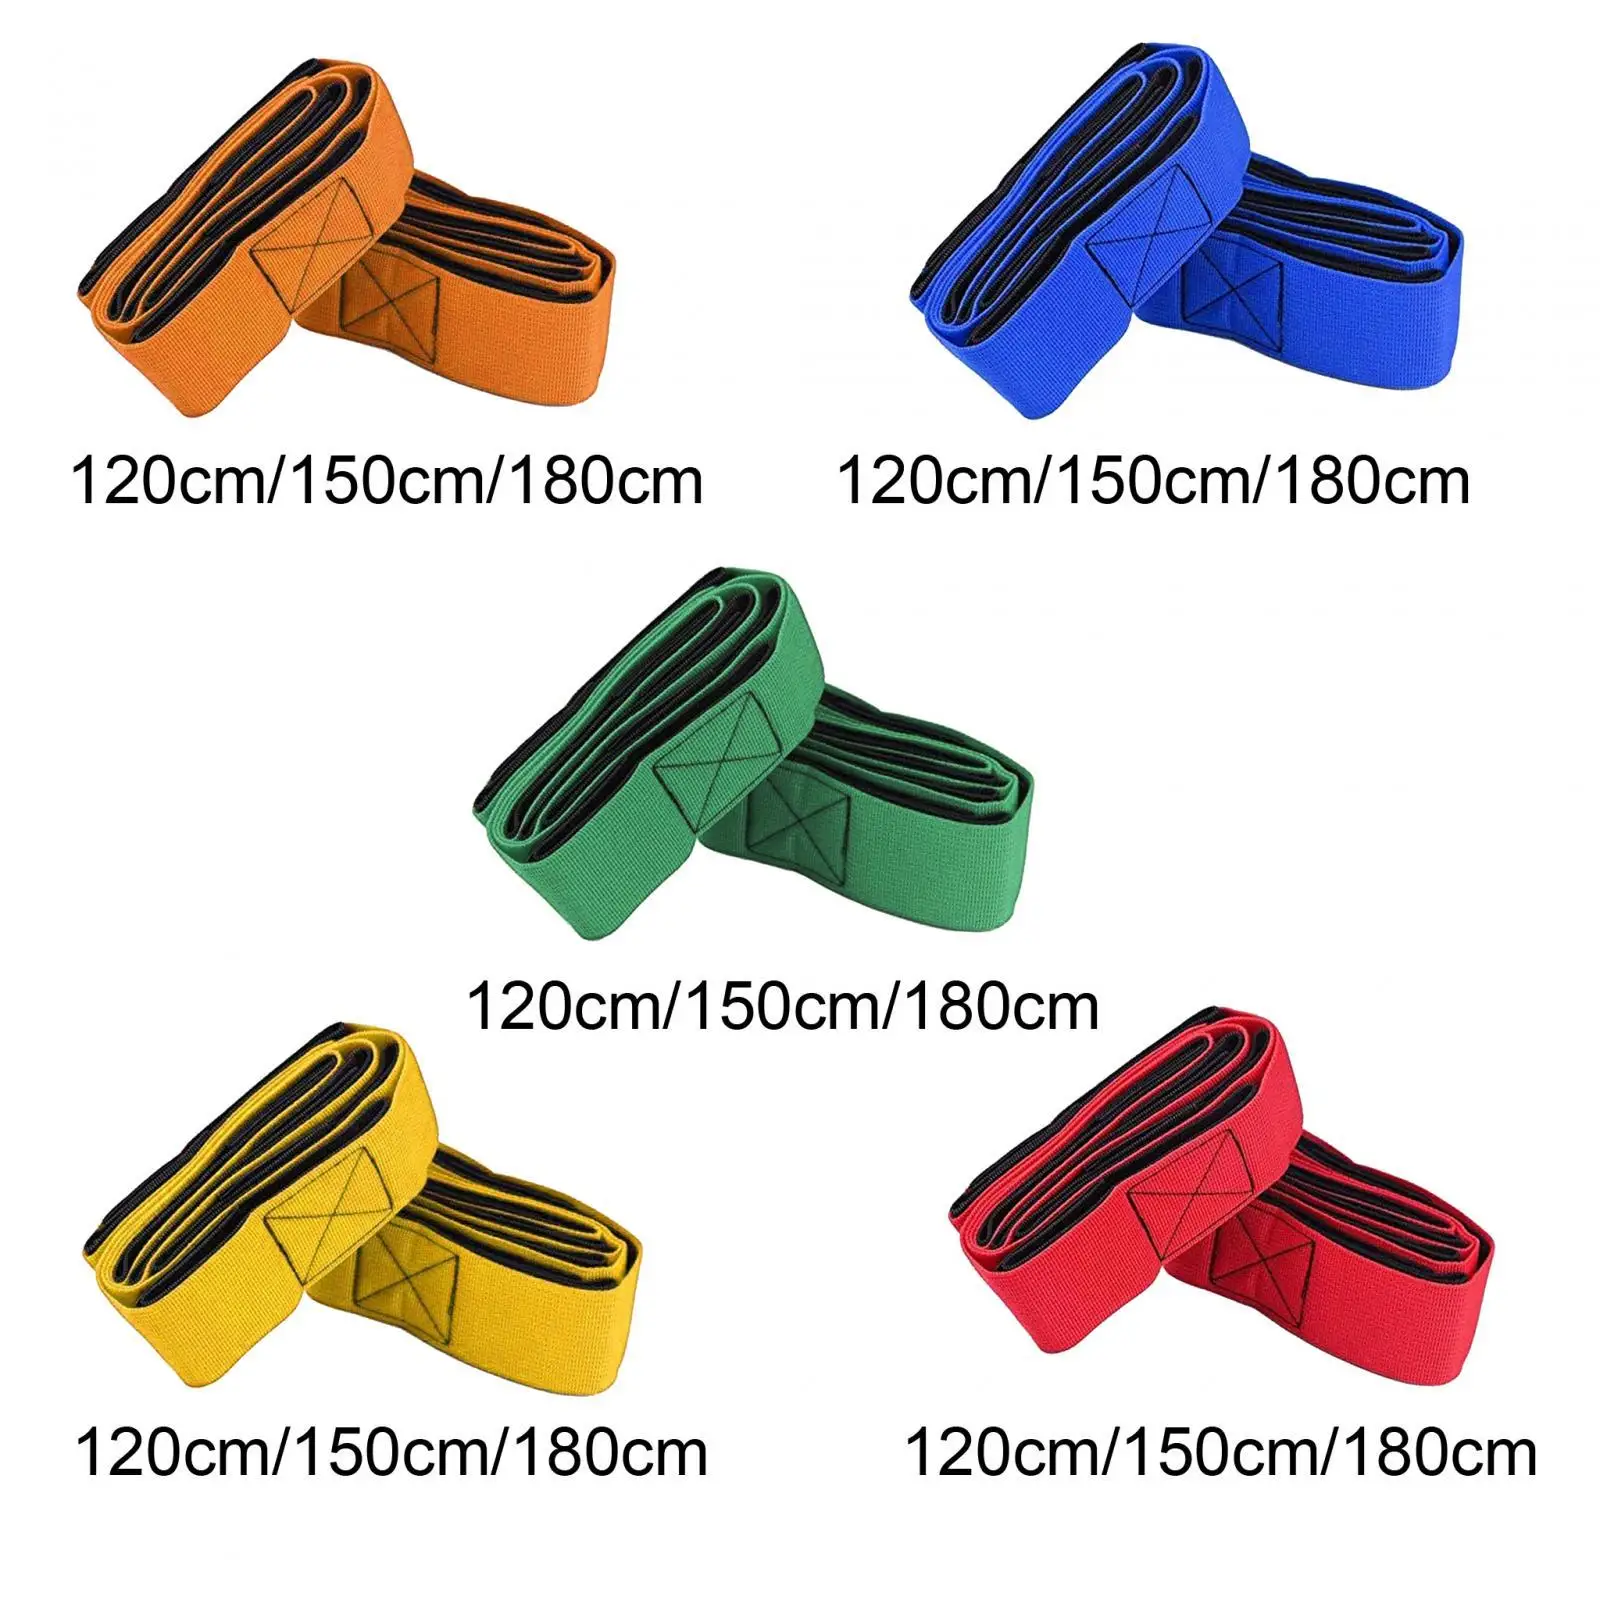 

2Pcs Legged Race Band Party Group Game Team Building Games Team Race Game for Backyard Outdoor Activity Training Party